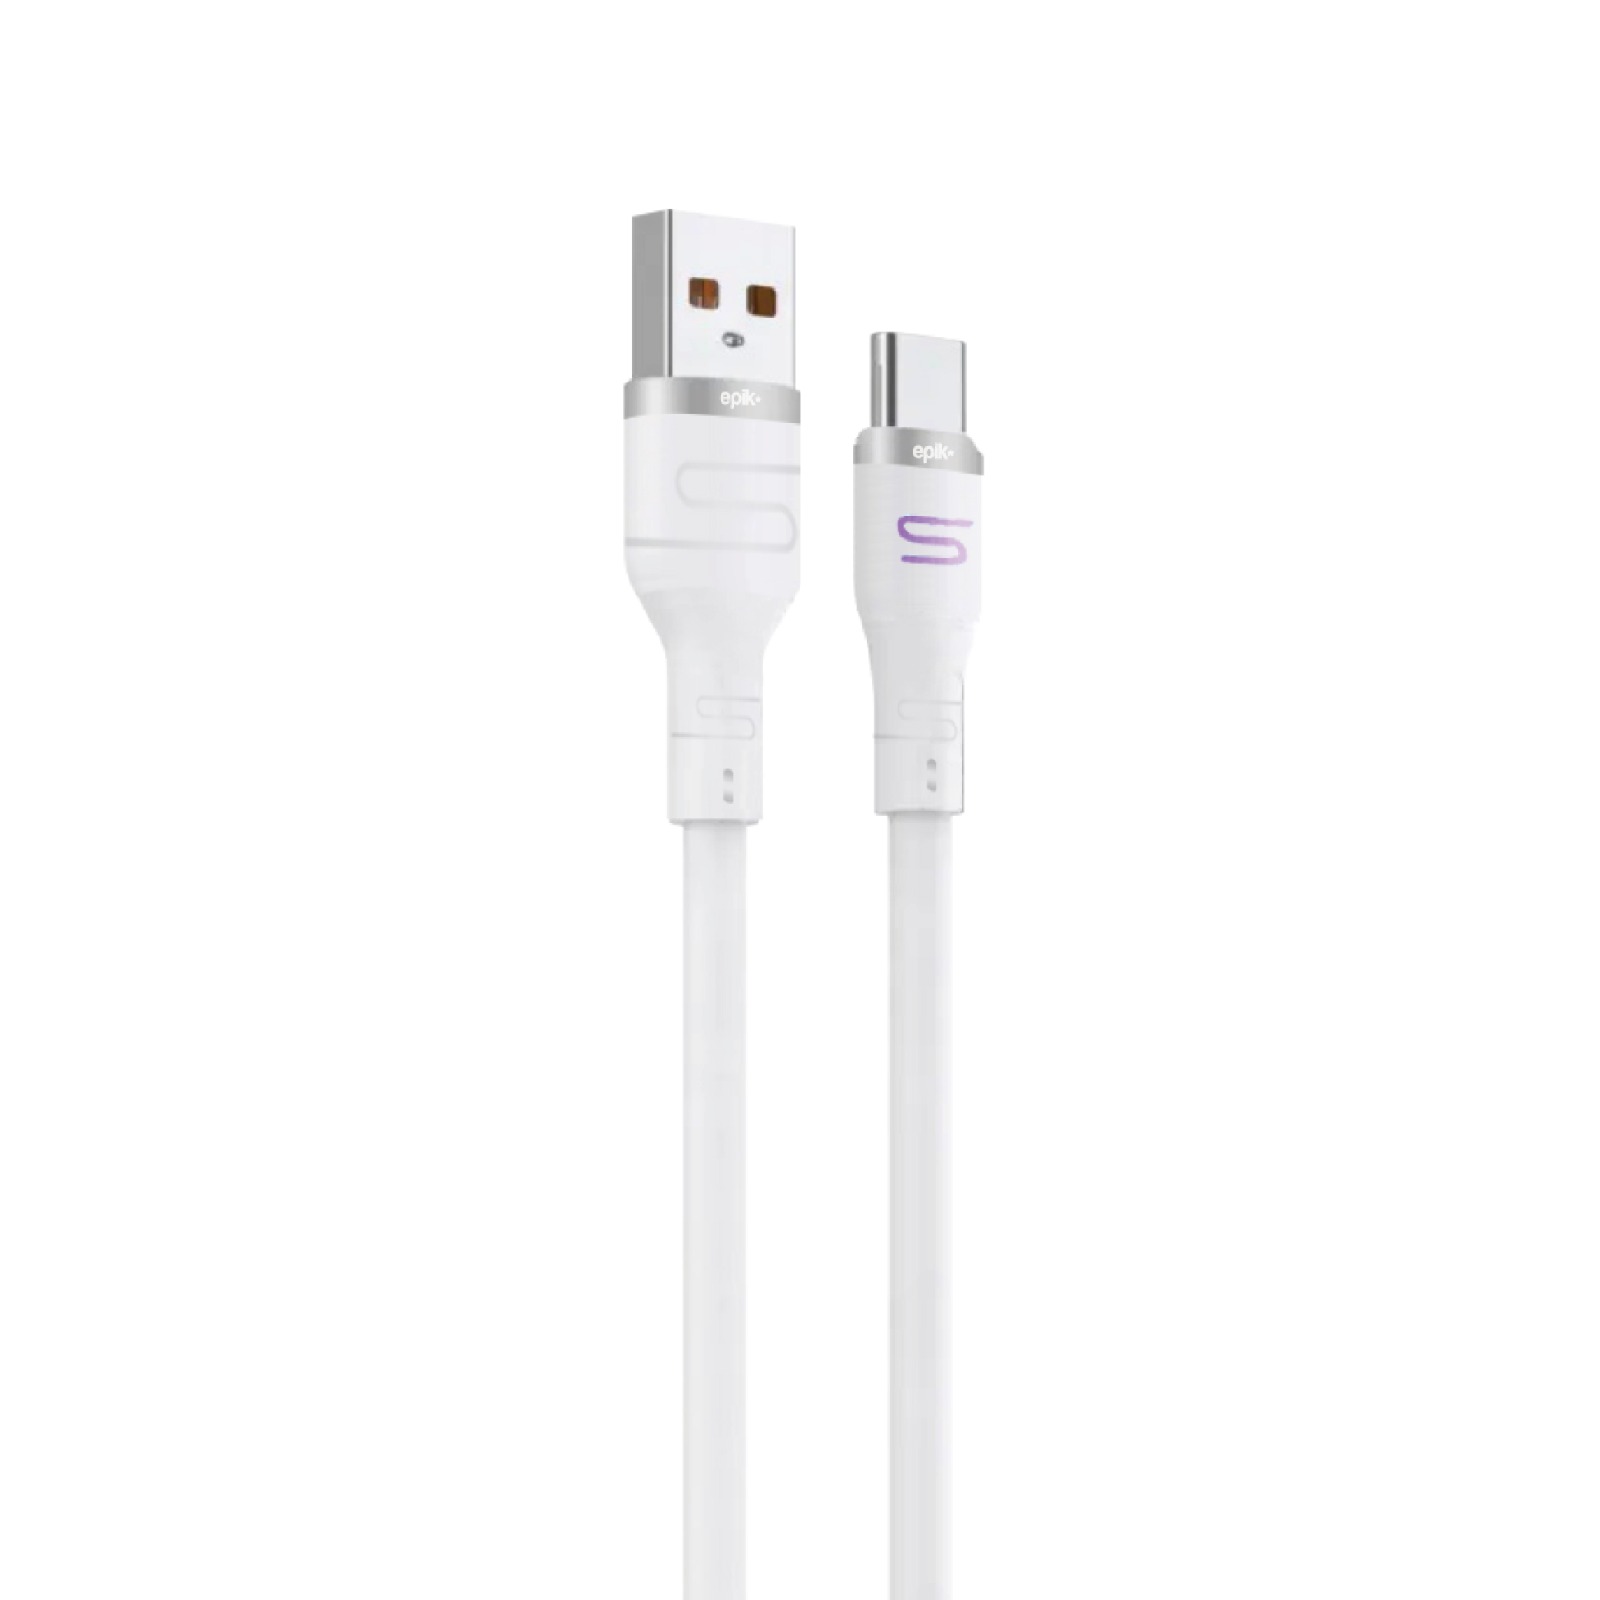 Cable 3.0 a Fast Charge Tipo C a Usb Epik 2689